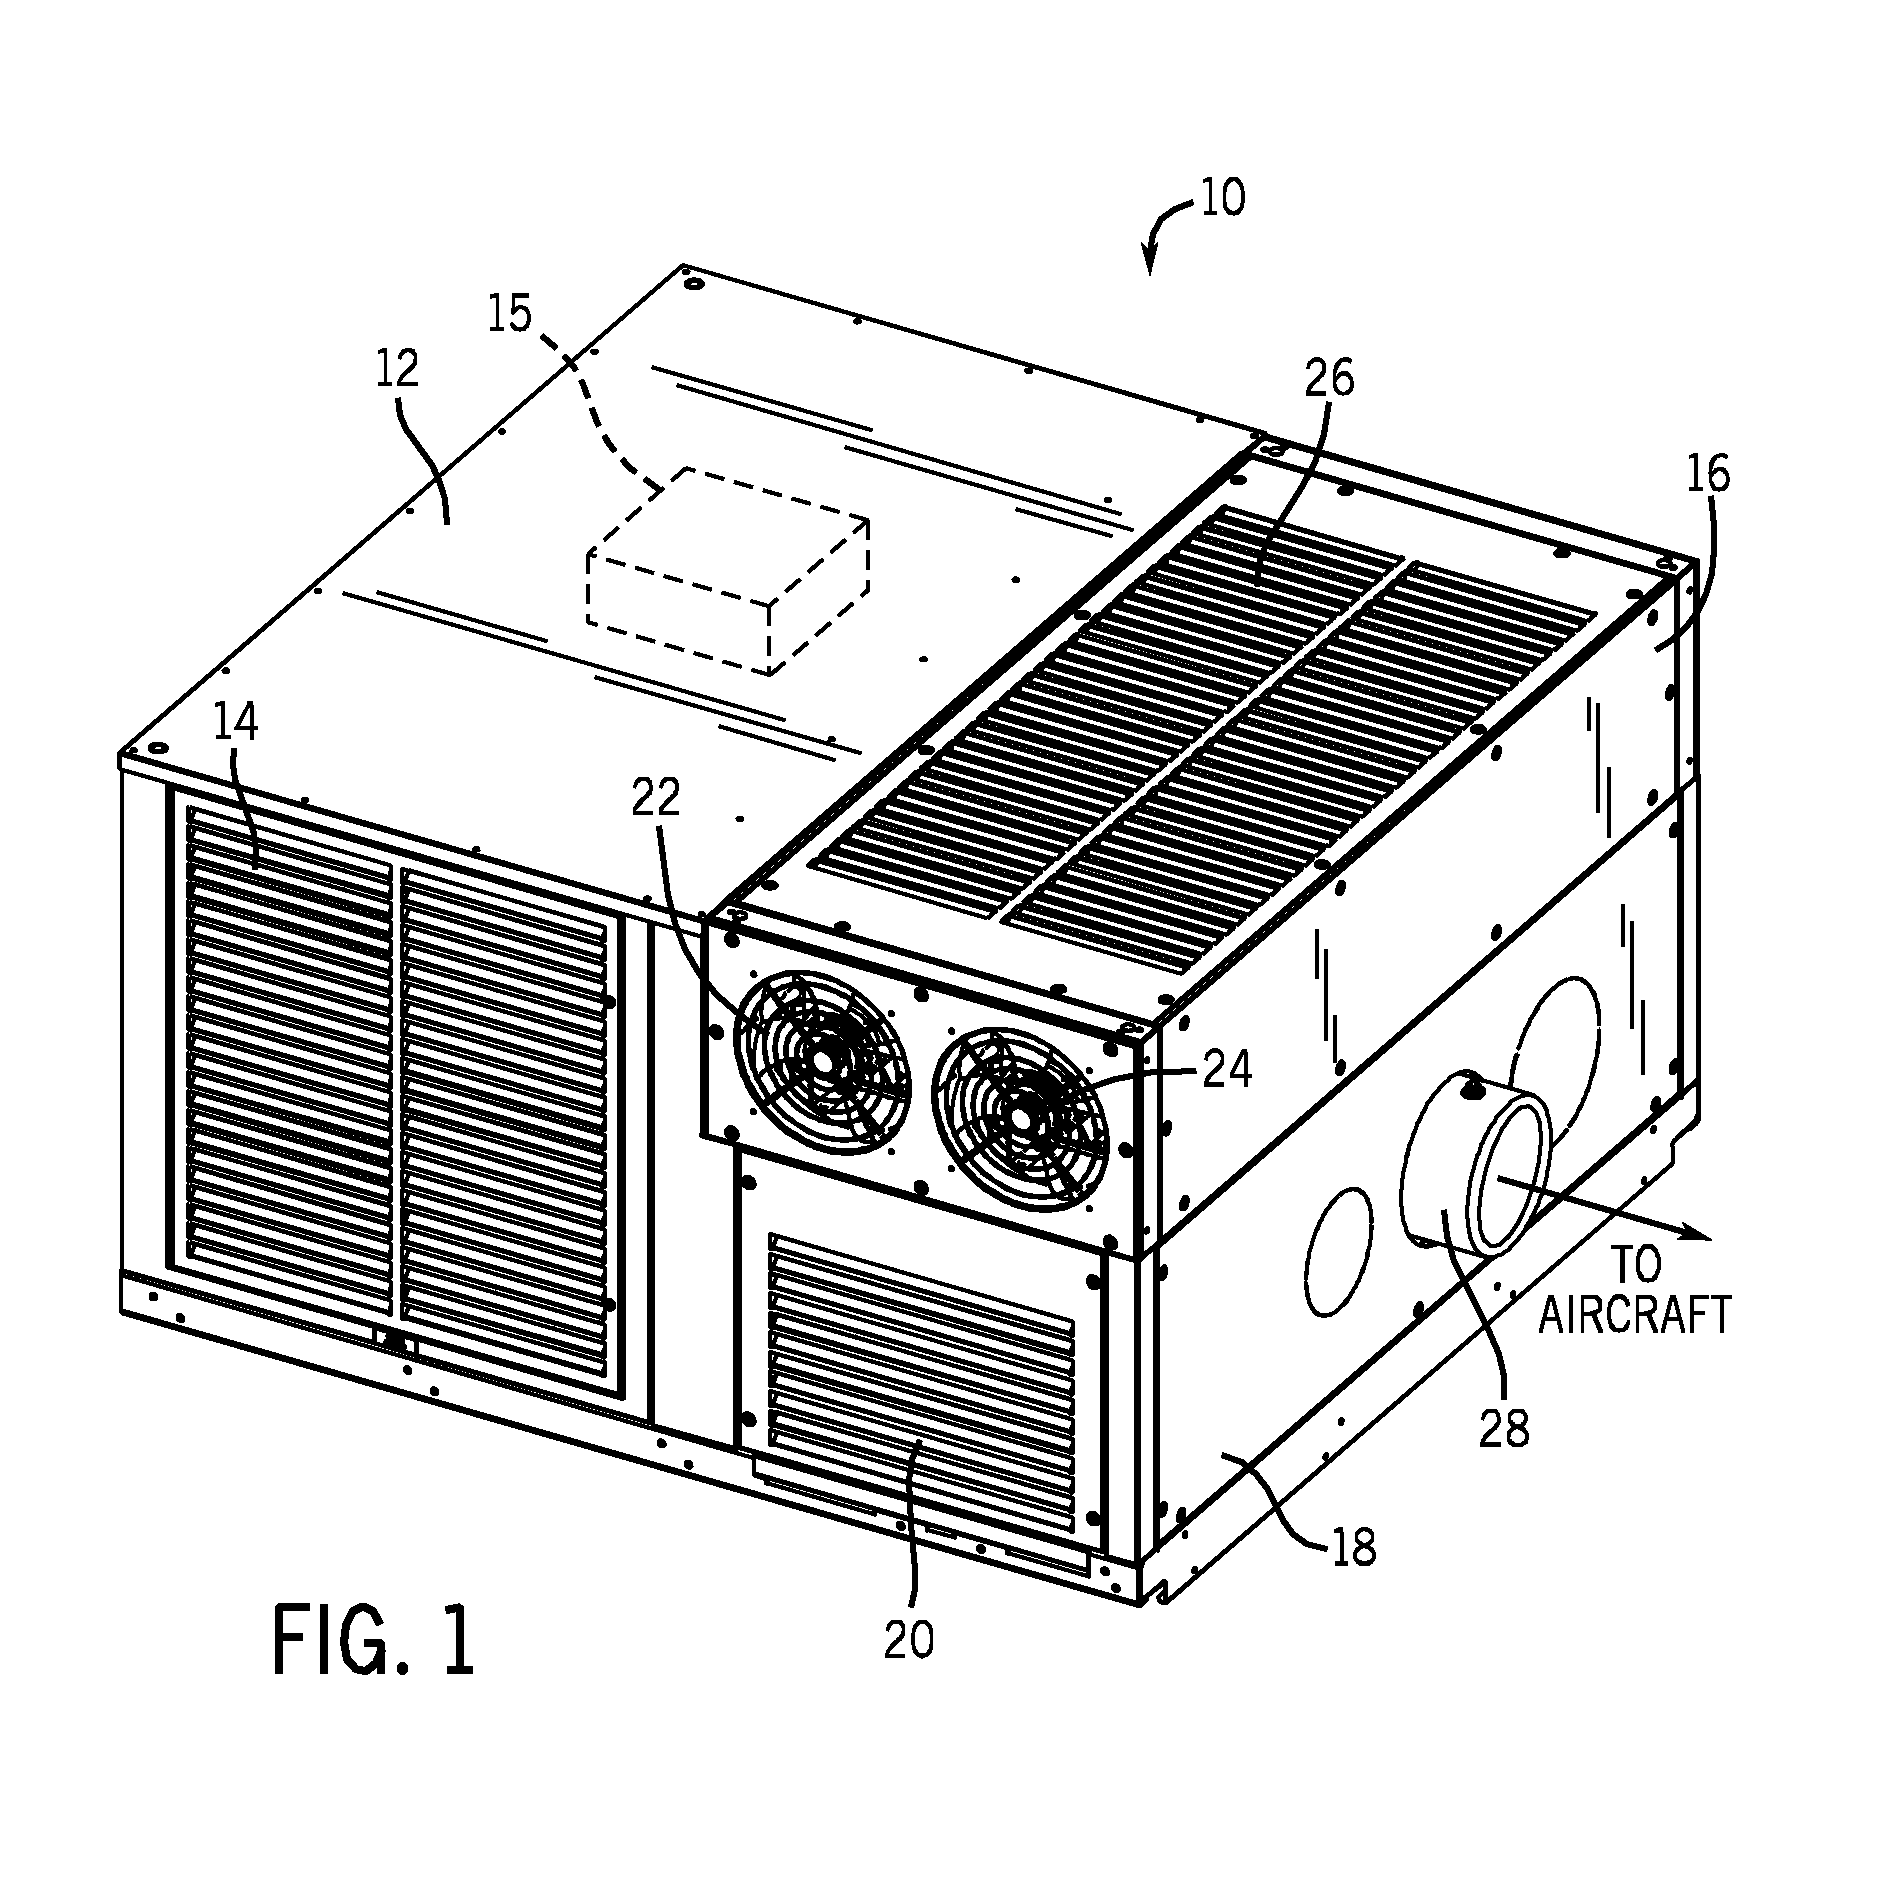 Control systems and methods for modular heating, ventilating, air conditioning, and refrigeration systems